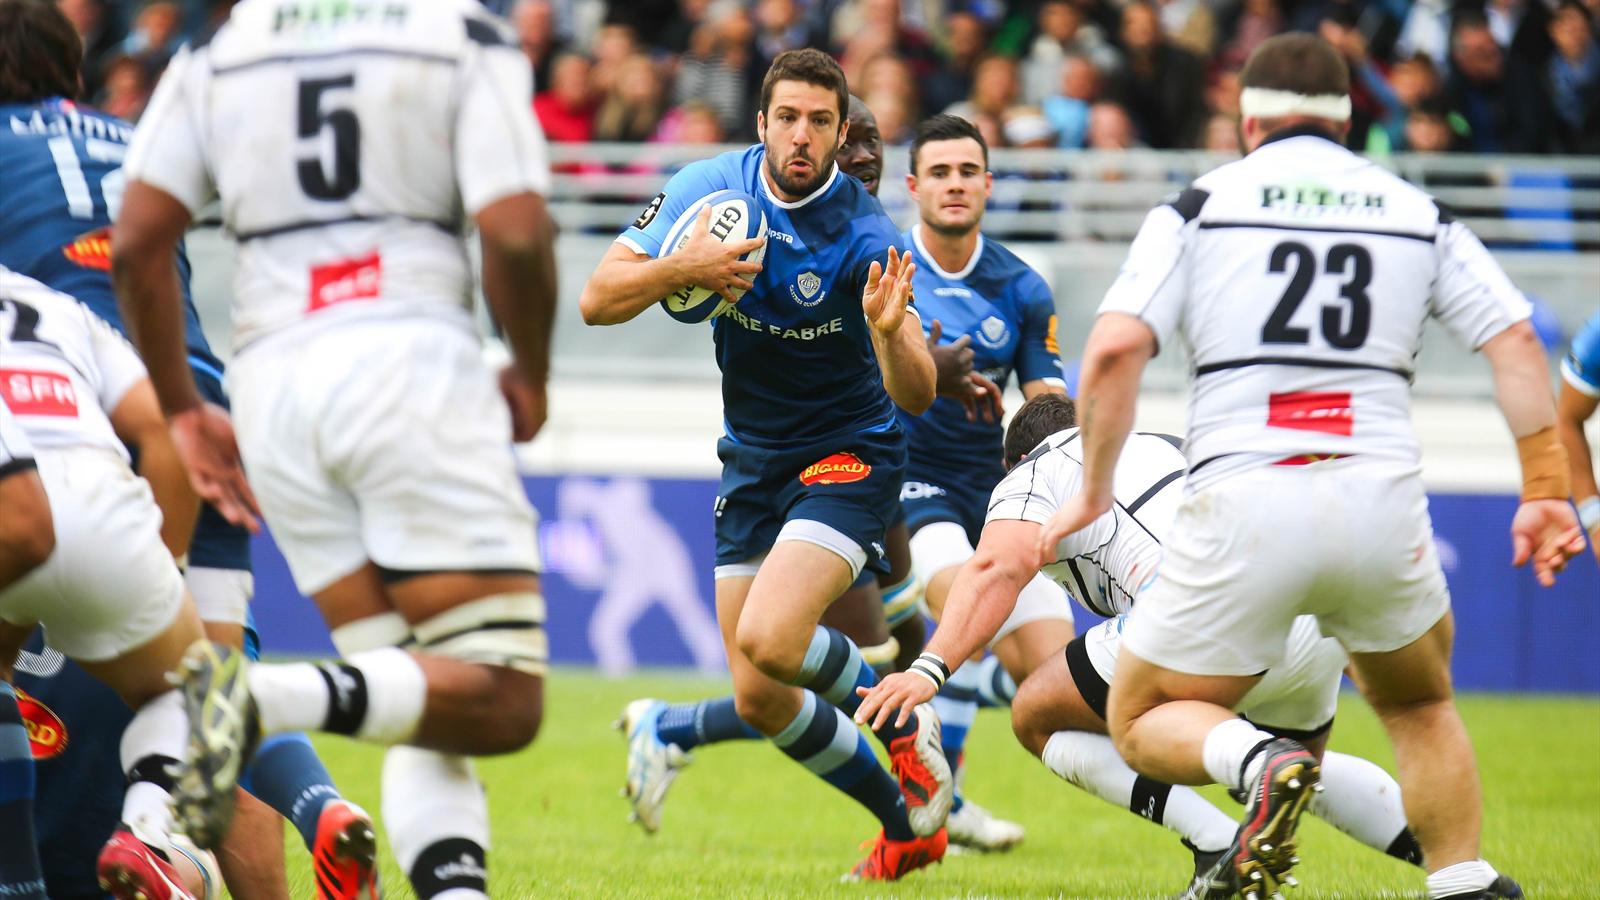 Rugby Top 14: Match Racing Metro 92 - Castres Olympique en direct live streaming